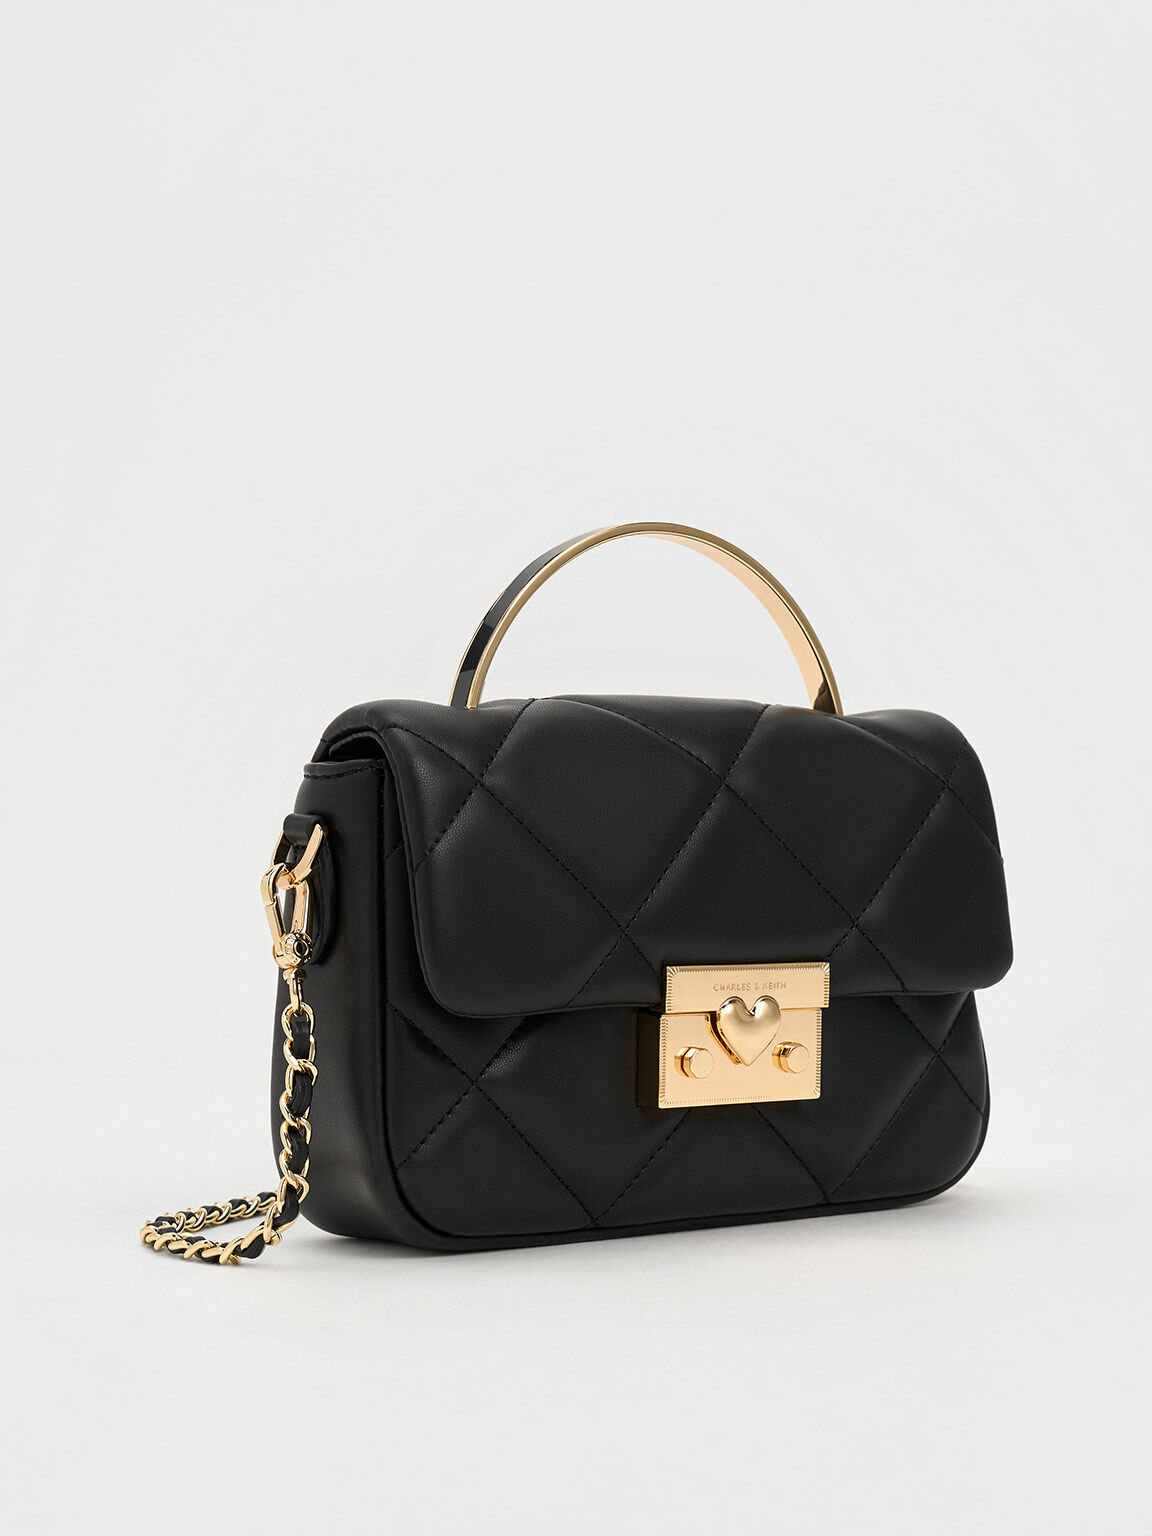 Black Quilted Boxy Top Handle Bag - CHARLES & KEITH International